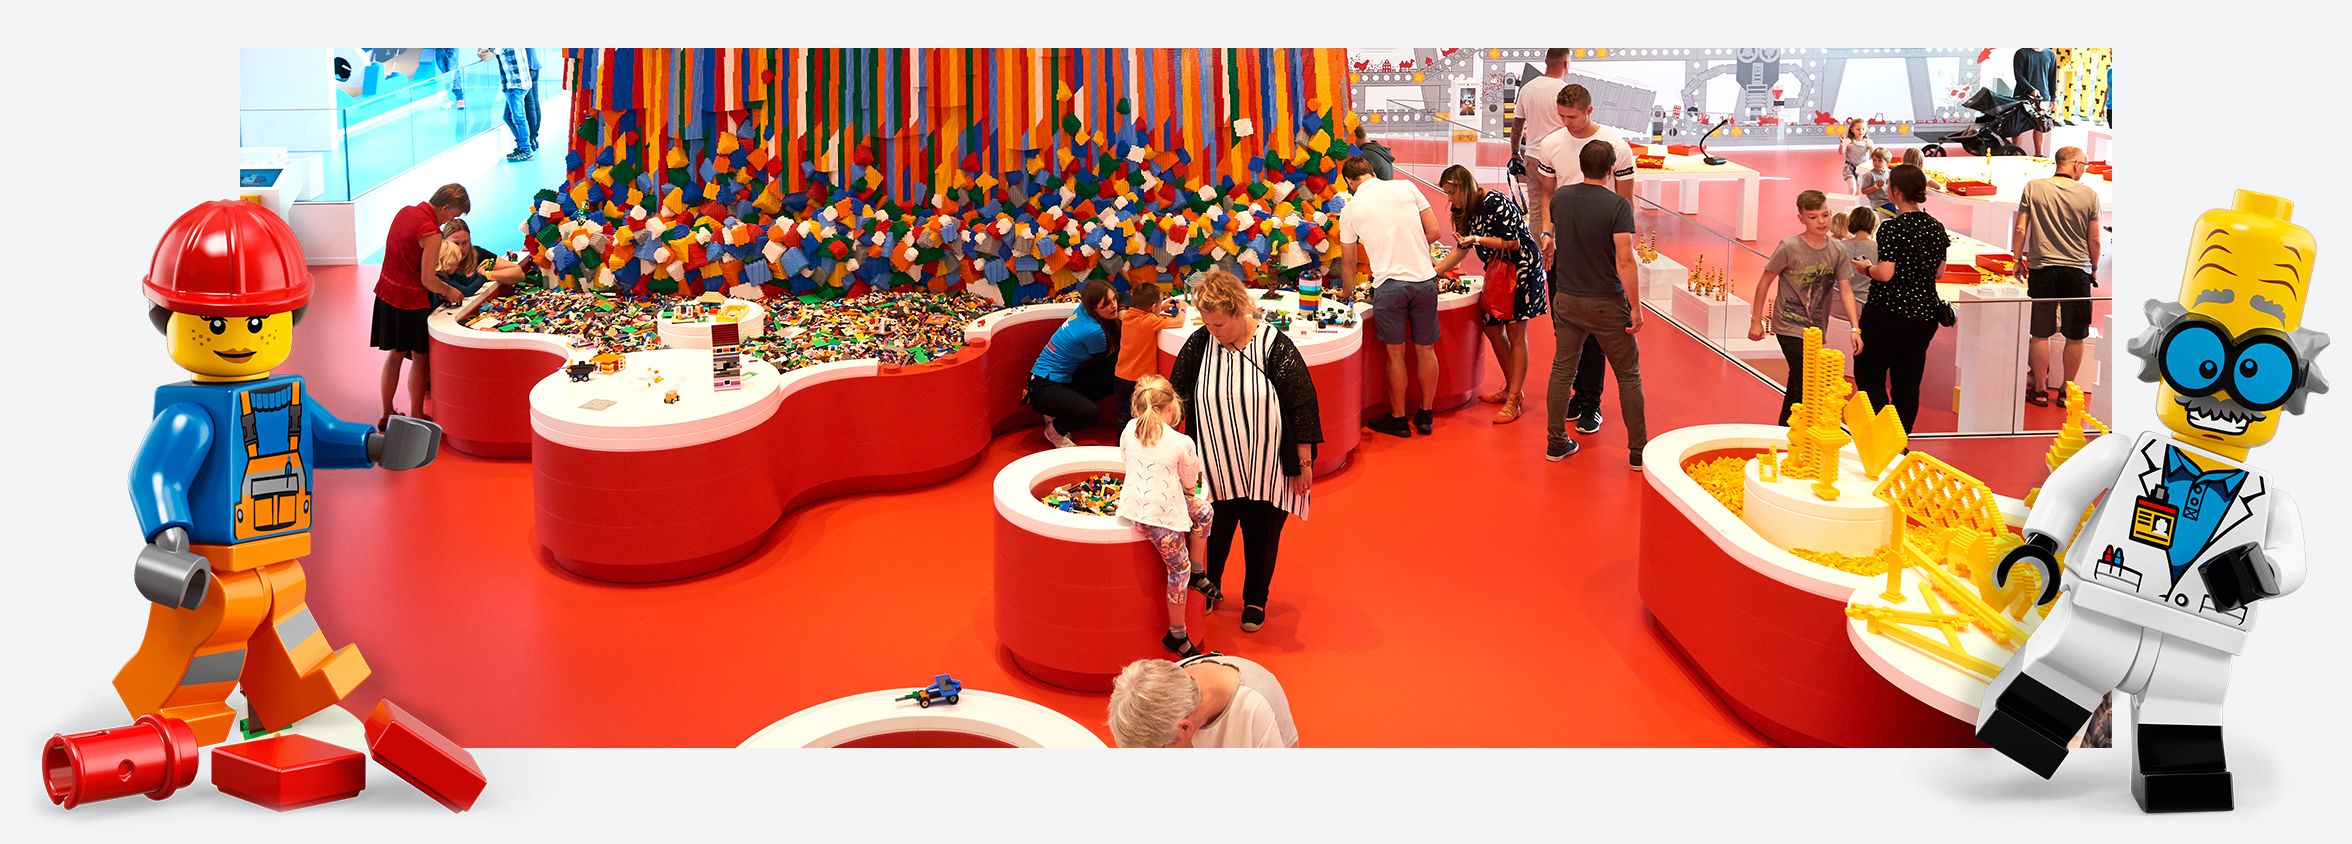 Lego house red zone